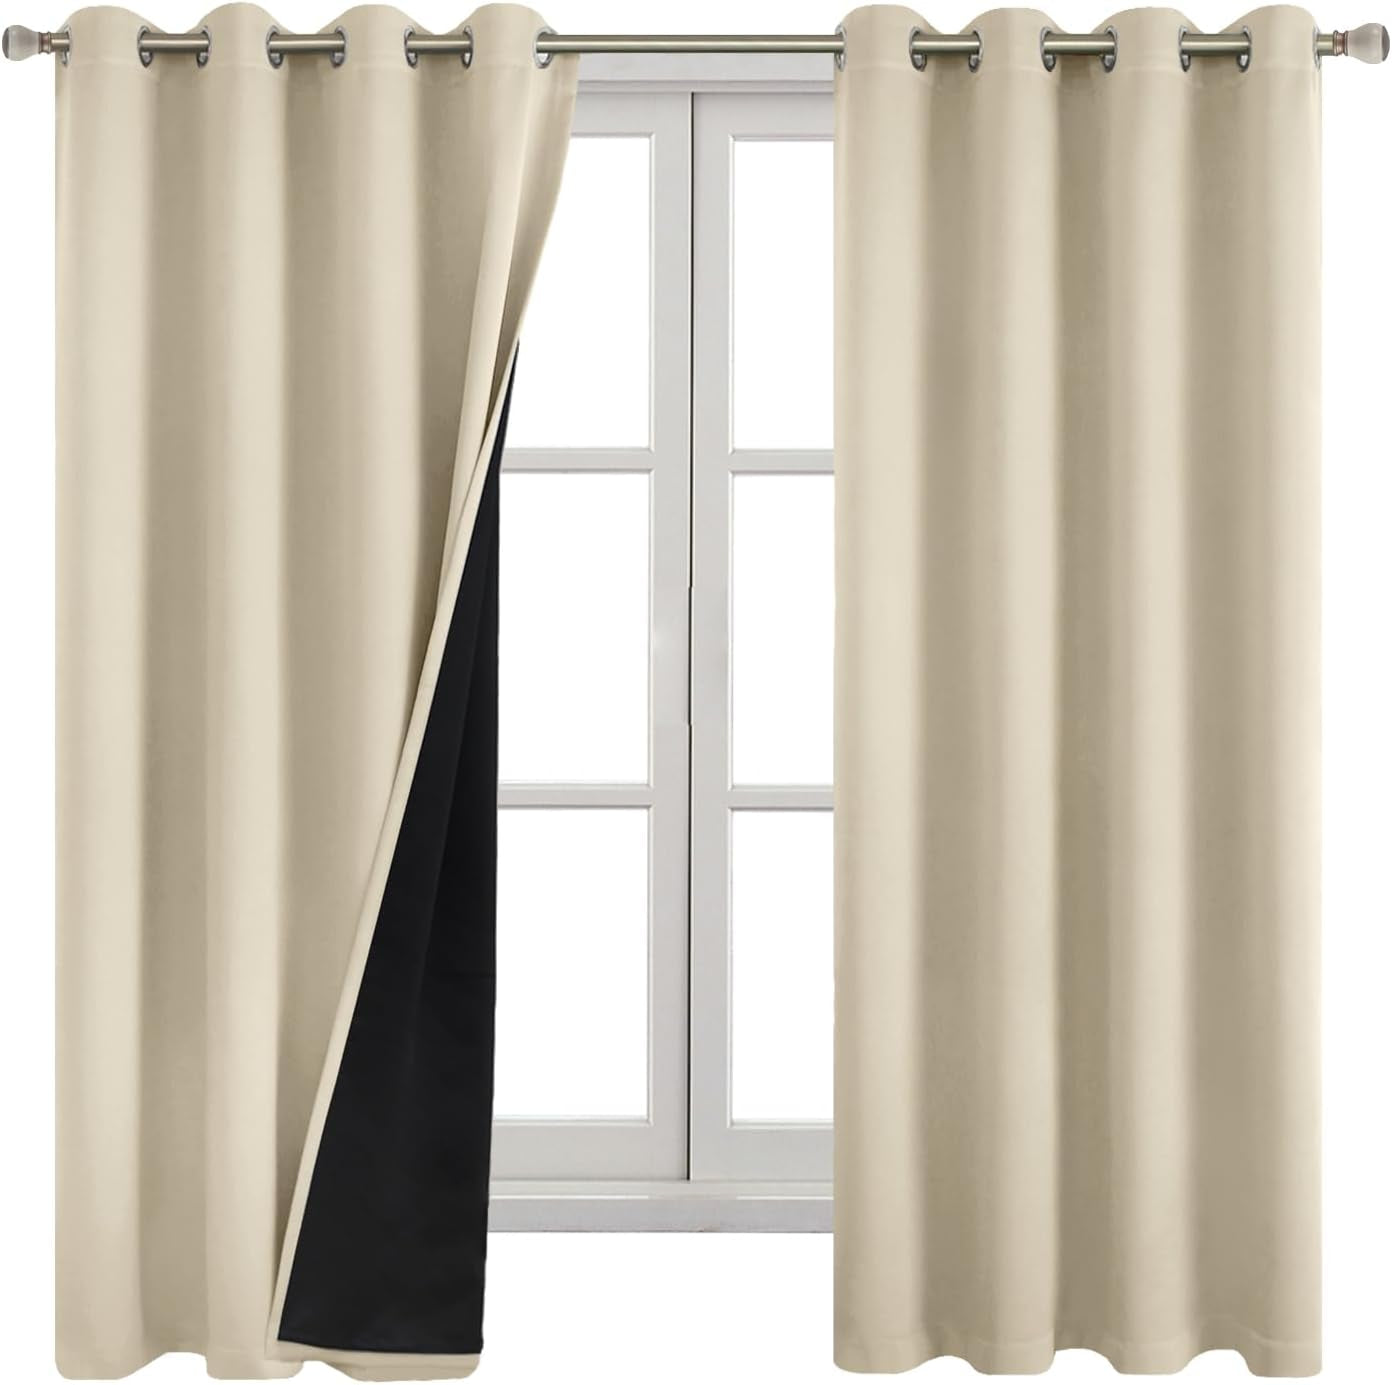 QUEMAS Short Blackout Curtains 54 Inch Length 2 Panels, 100% Light Blocking Thermal Insulated Soundproof Grommet Small Window Curtains for Bedroom Basement with Black Liner, Each 42 Inch Wide, White  QUEMAS Beige + Black Lining W52 X L72 